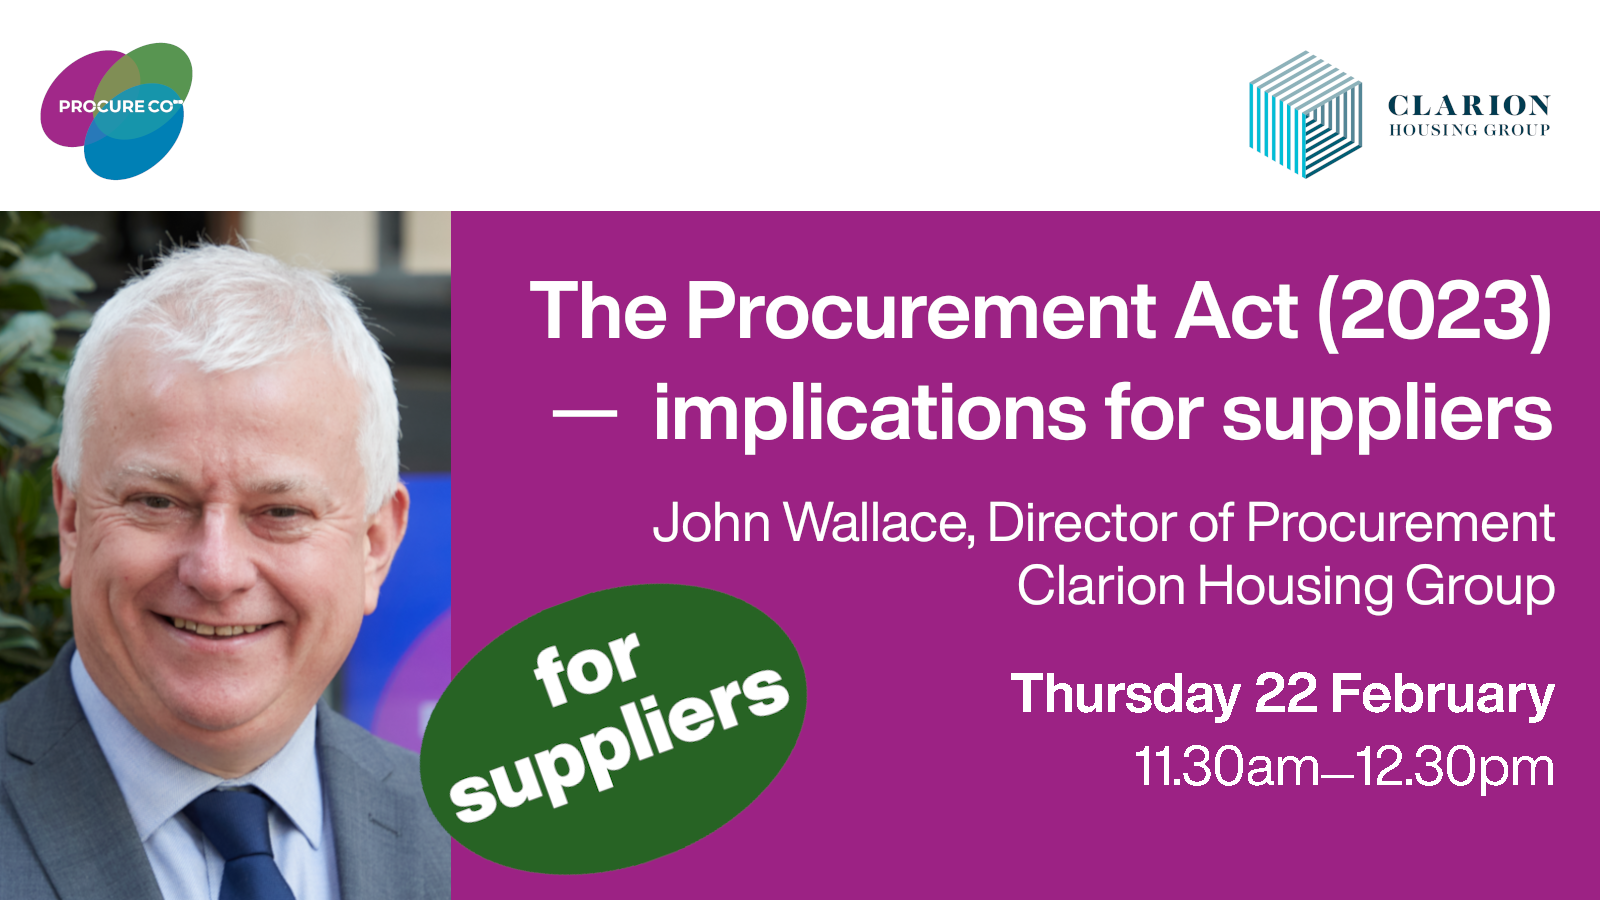 The Procurement Act (2023) implications for suppliers ProcureCo